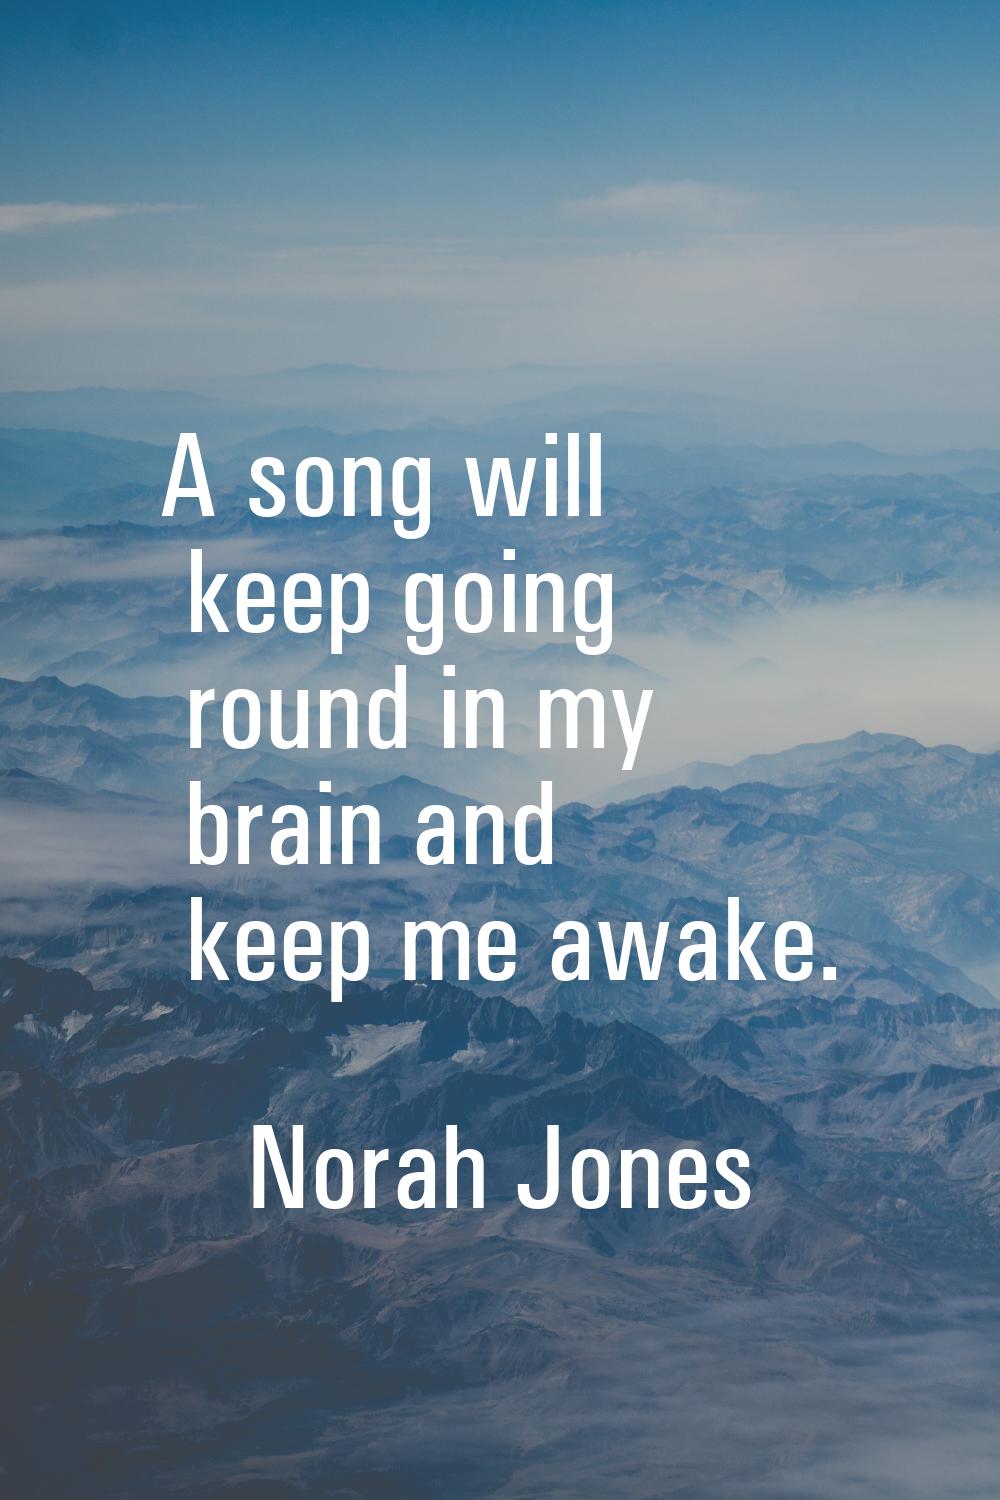 A song will keep going round in my brain and keep me awake.